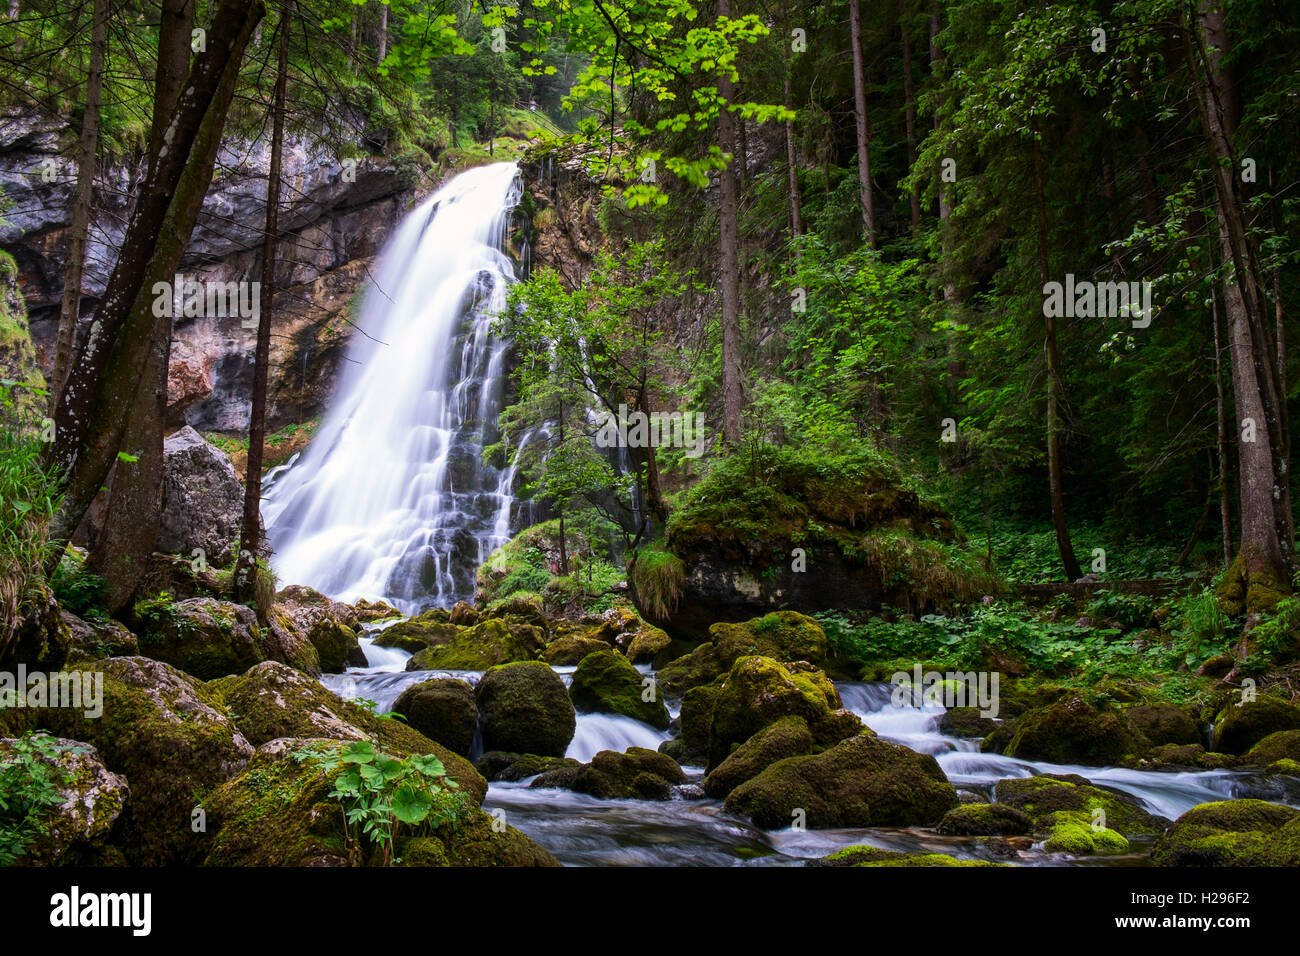 The majestic Gollinger Waterfall in Austria, Europe Stock Photo